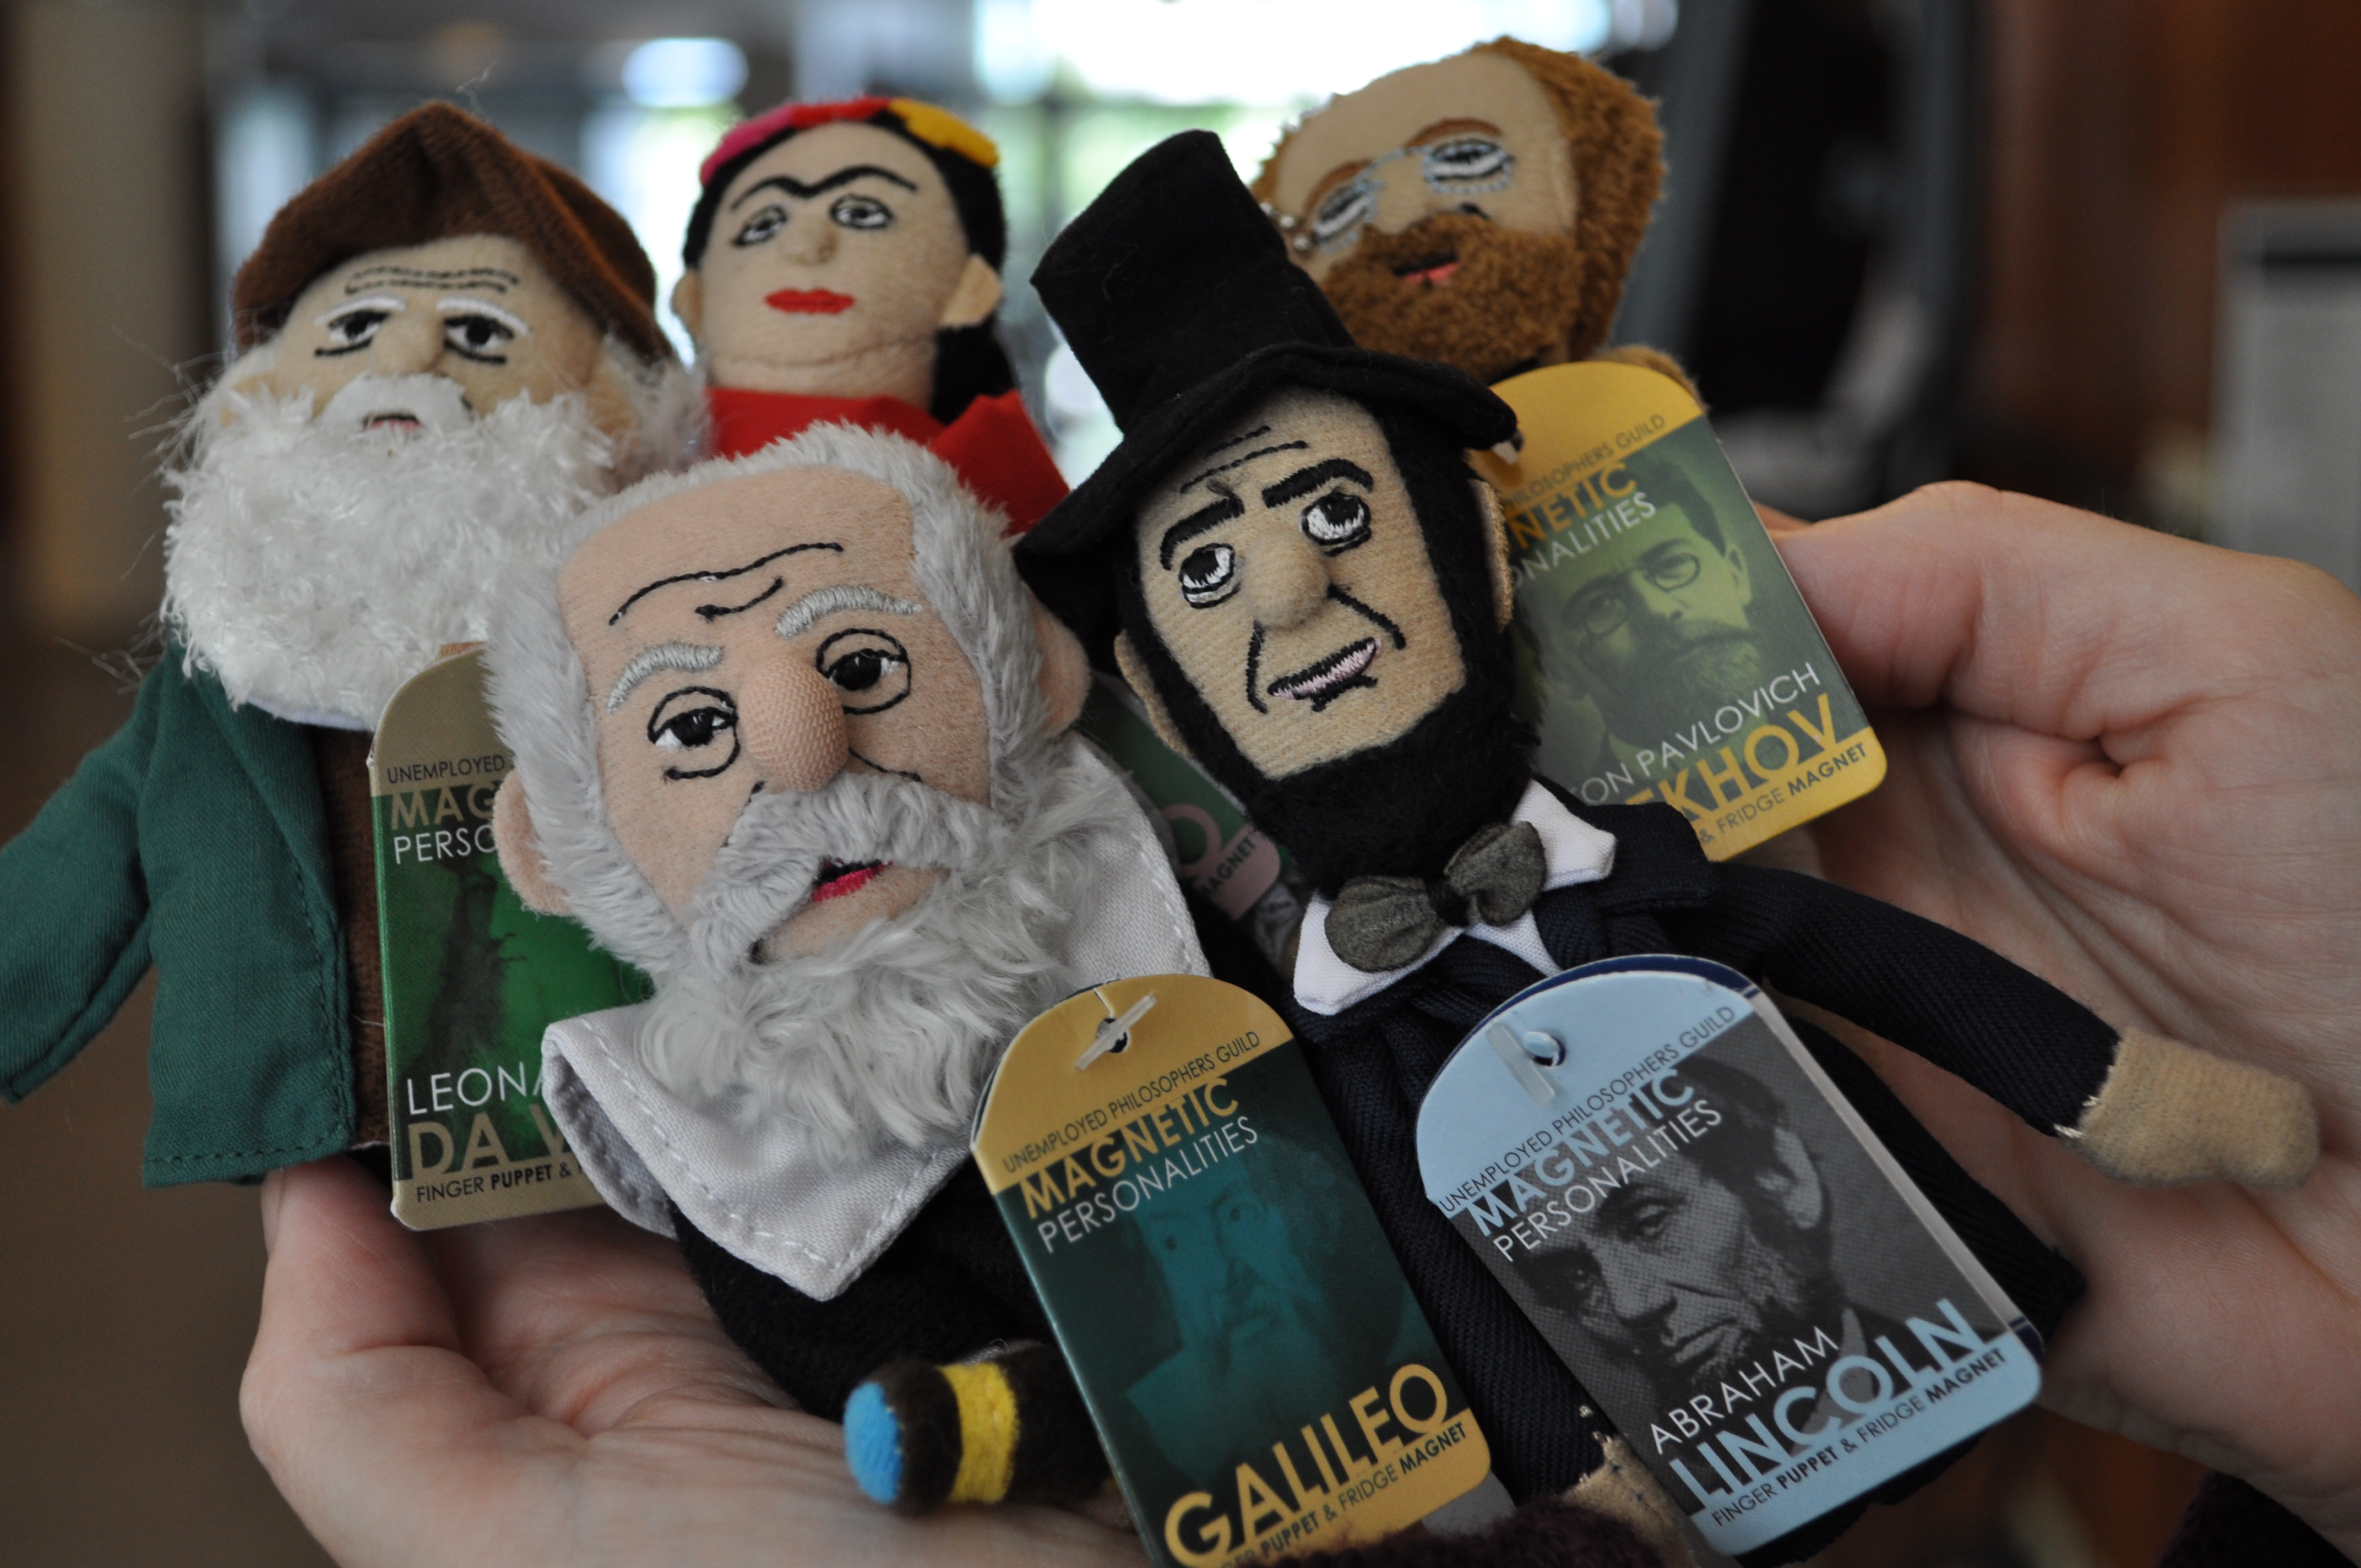 The gang's all here. Finger puppets missing from photo are Jane Austen and Virginia Woolfe. Guess they got out of hand.